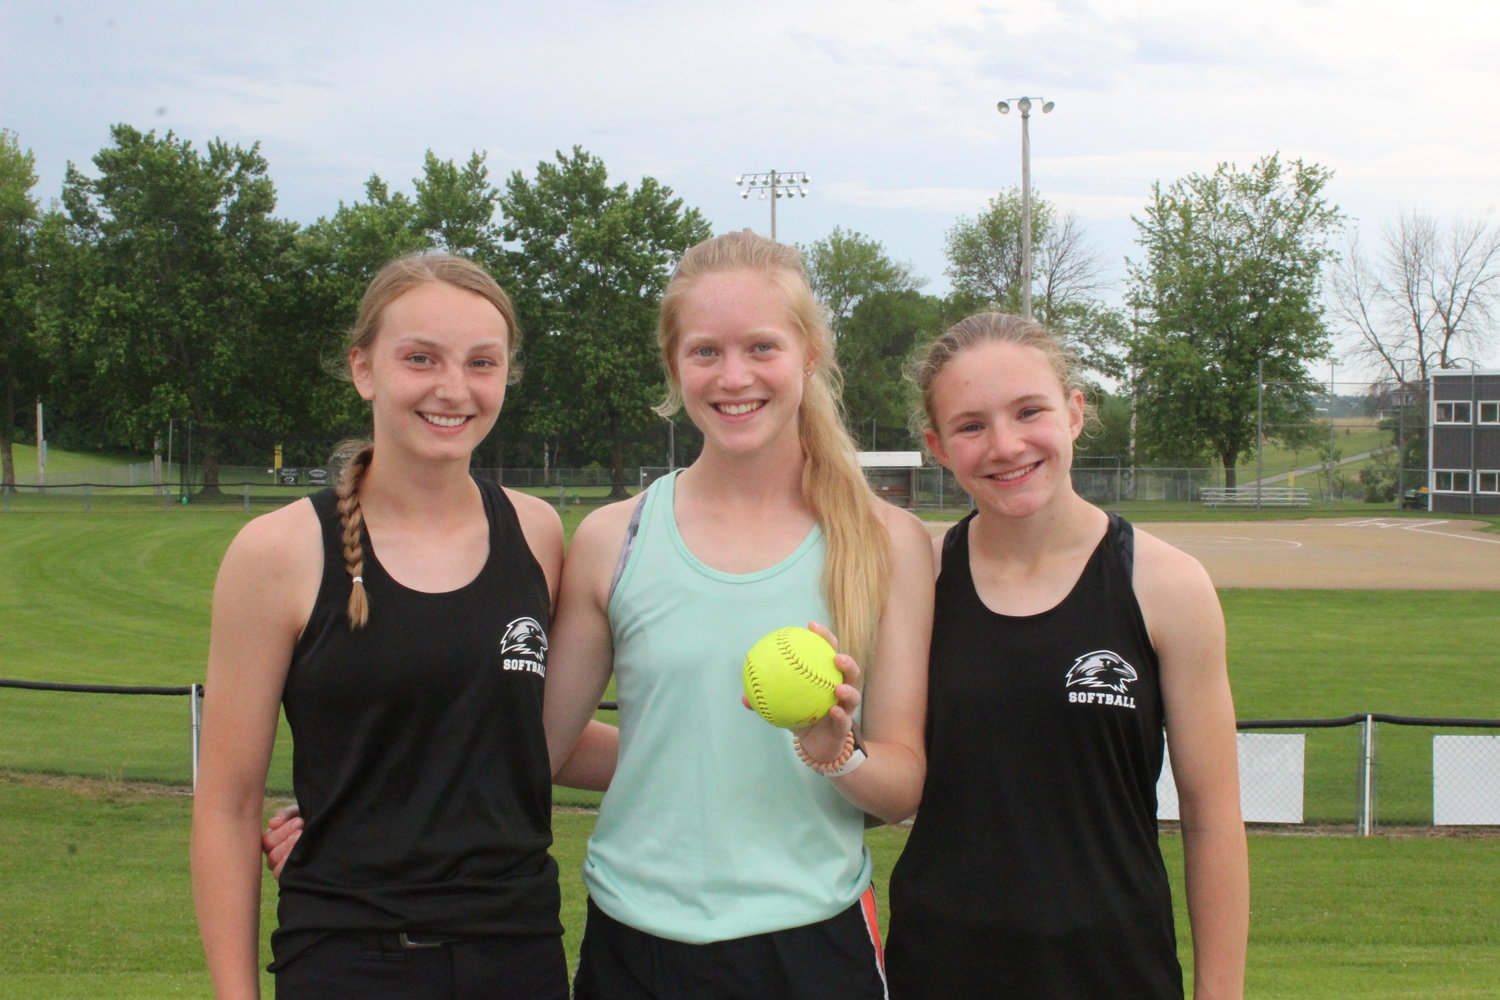 Hillcrest Academy softball players, from left, Malia Yoder, Leah Bontrager and Morgyn Nafziger.